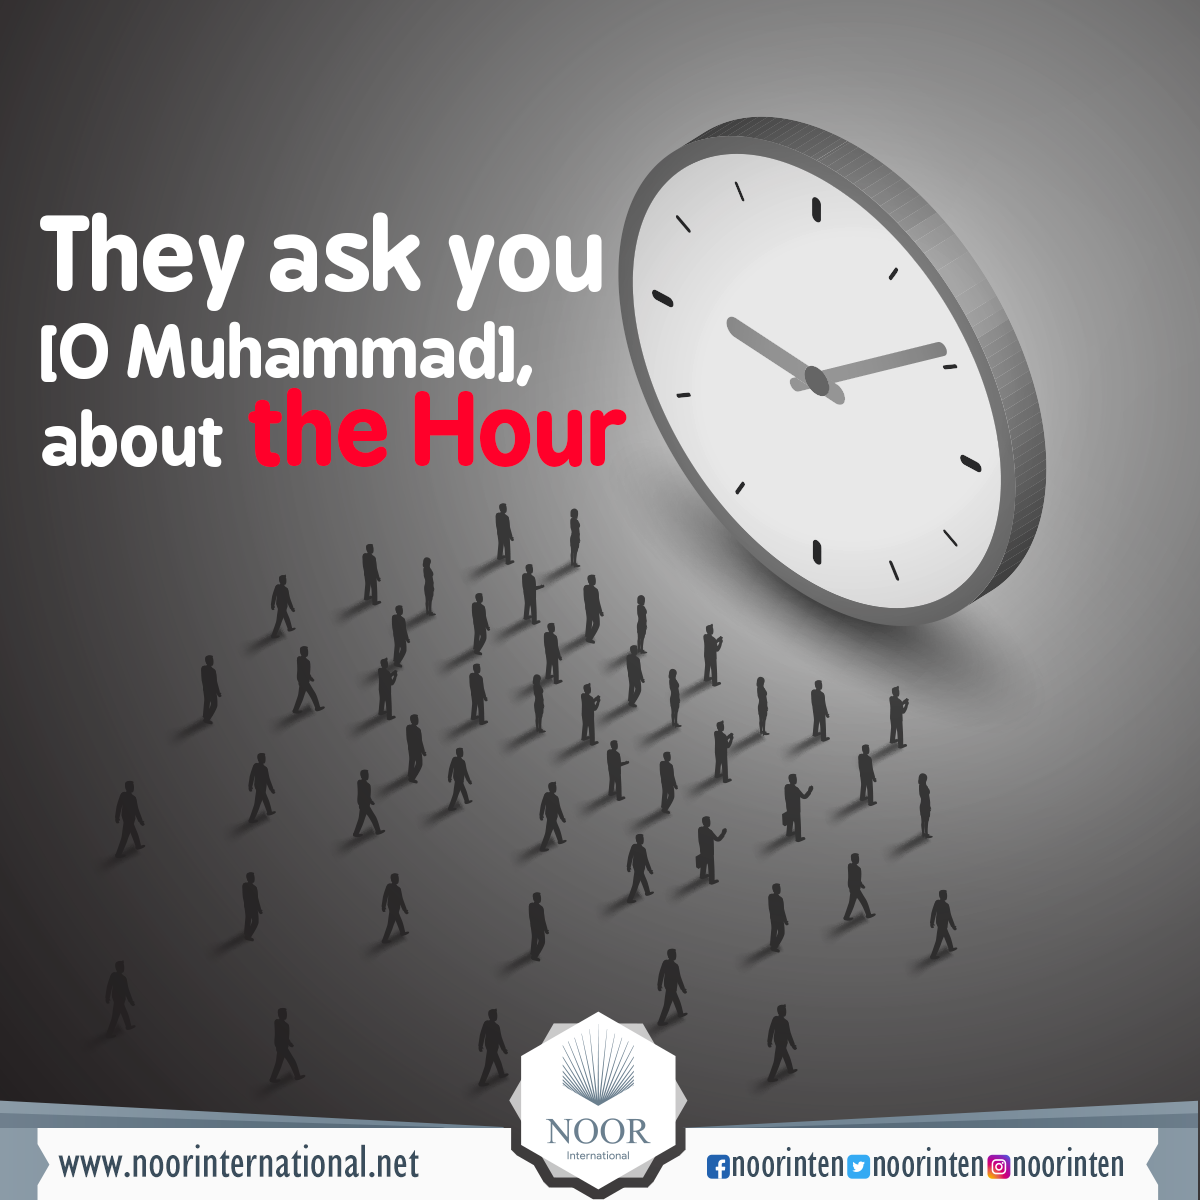 They ask you, [O Muhammad], about the Hour